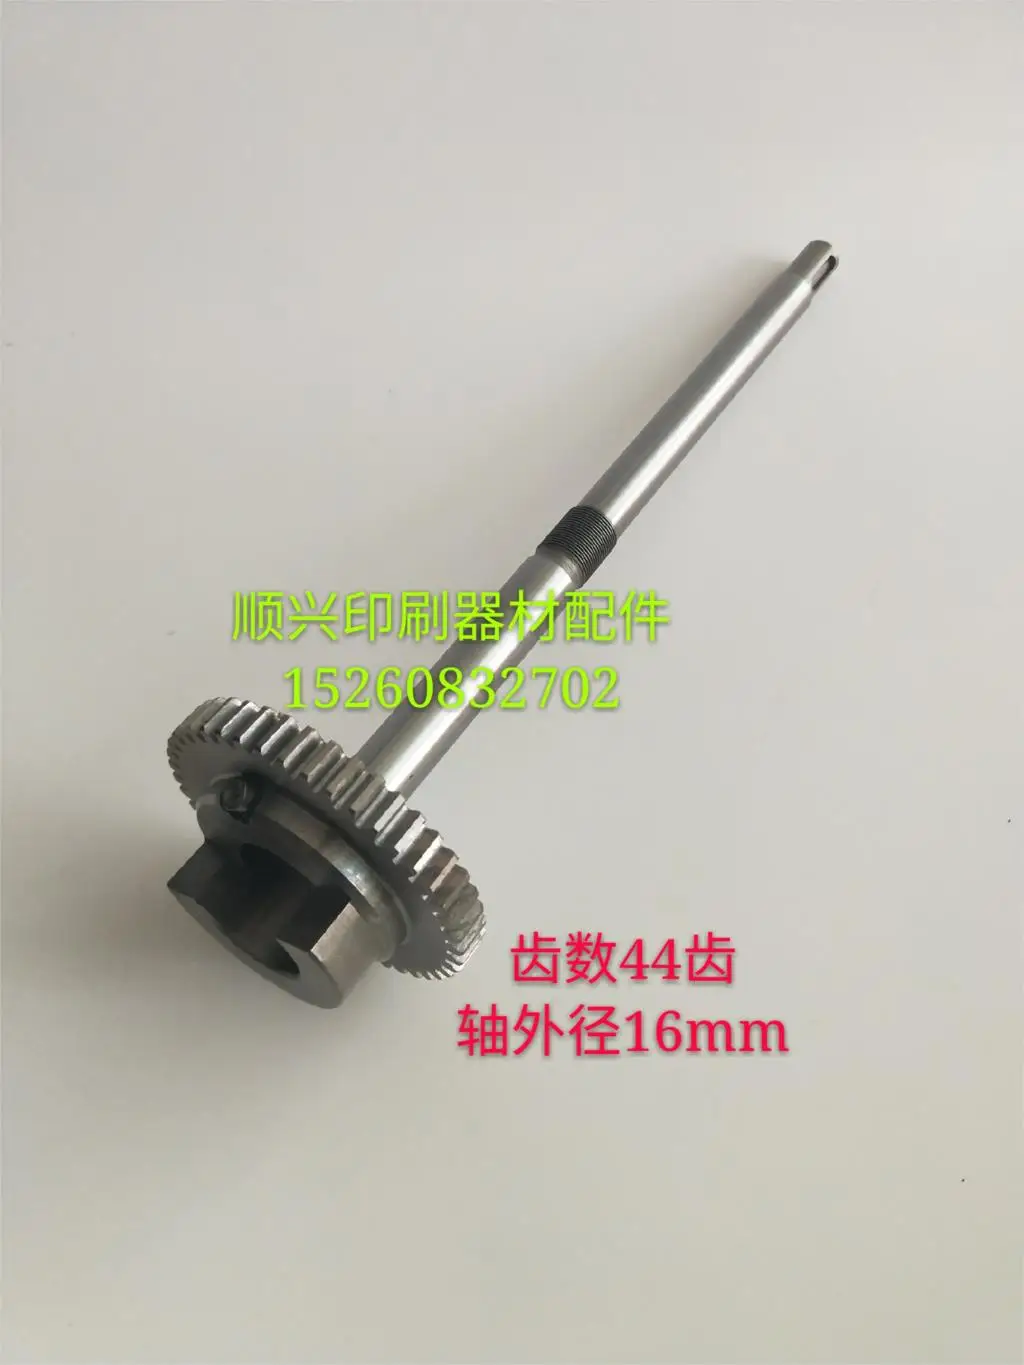 For Heidelberg Printing Machine Accessories SM / CD102 Water Stick Tooth Shaft 44 tooth Stainless Steel